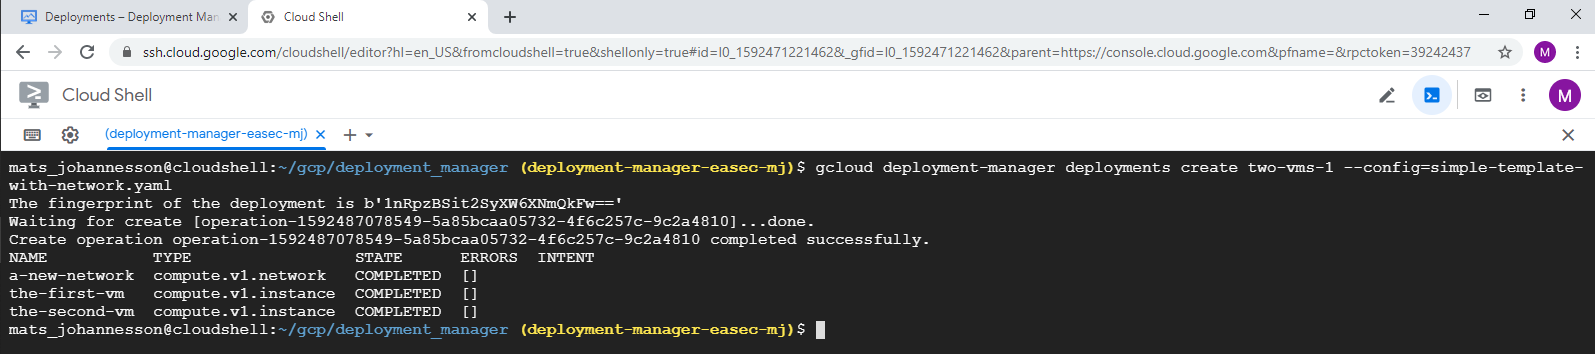 gcloud deployment-manager deployments create